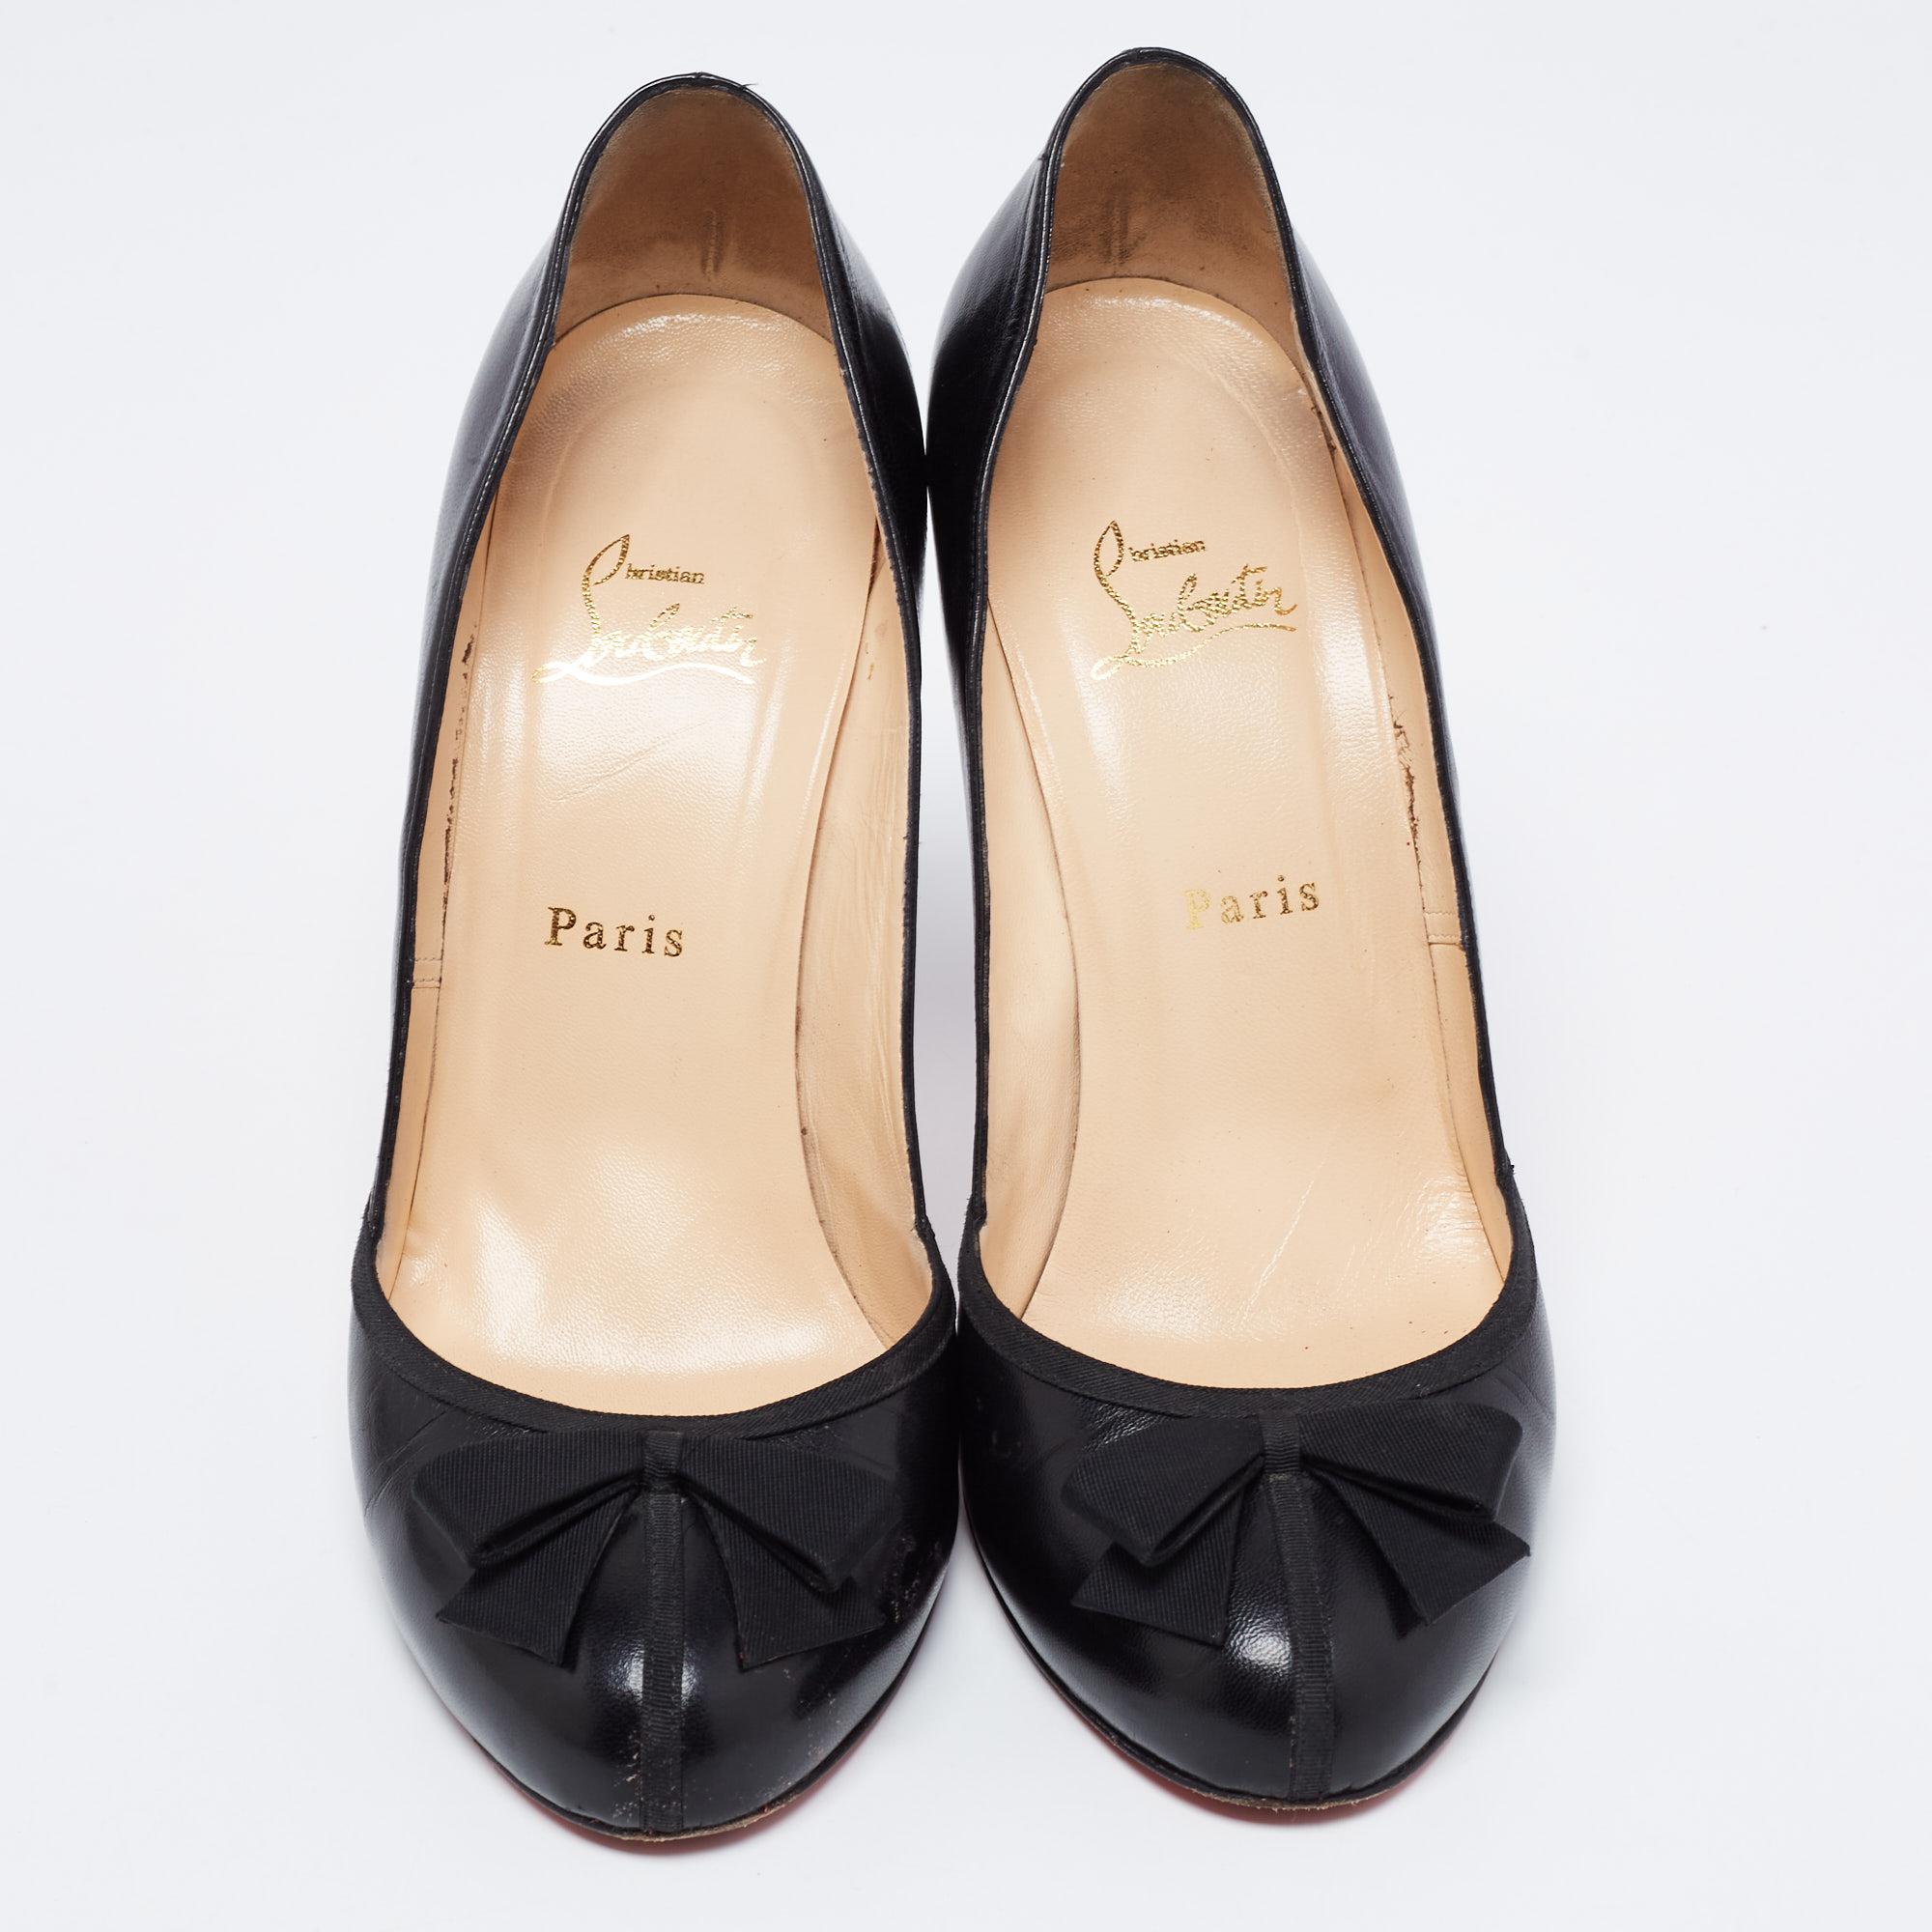 These gorgeous Lavalliere pumps grant glamour and elegance to your feet flawlessly. They are crafted using black leather and fabric, with a bow accent accentuating the rounded toes. They showcase a slip-on style and towering 11 cm heels. Look classy